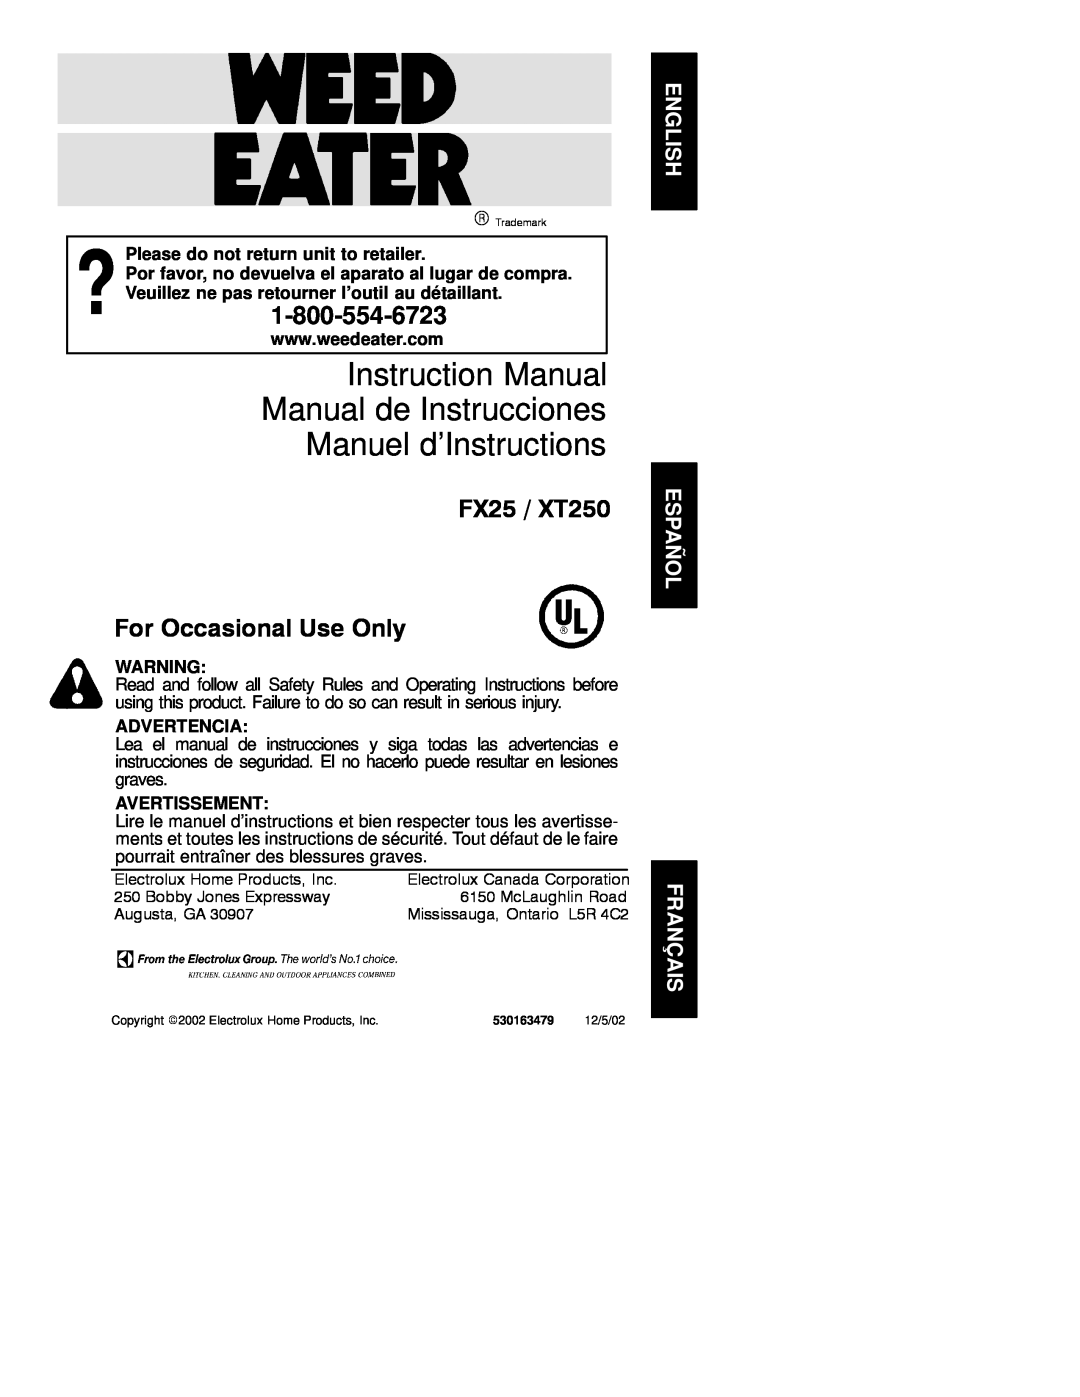 Weed Eater 530163479 instruction manual Please do not return unit to retailer, Advertencia, Avertissement 